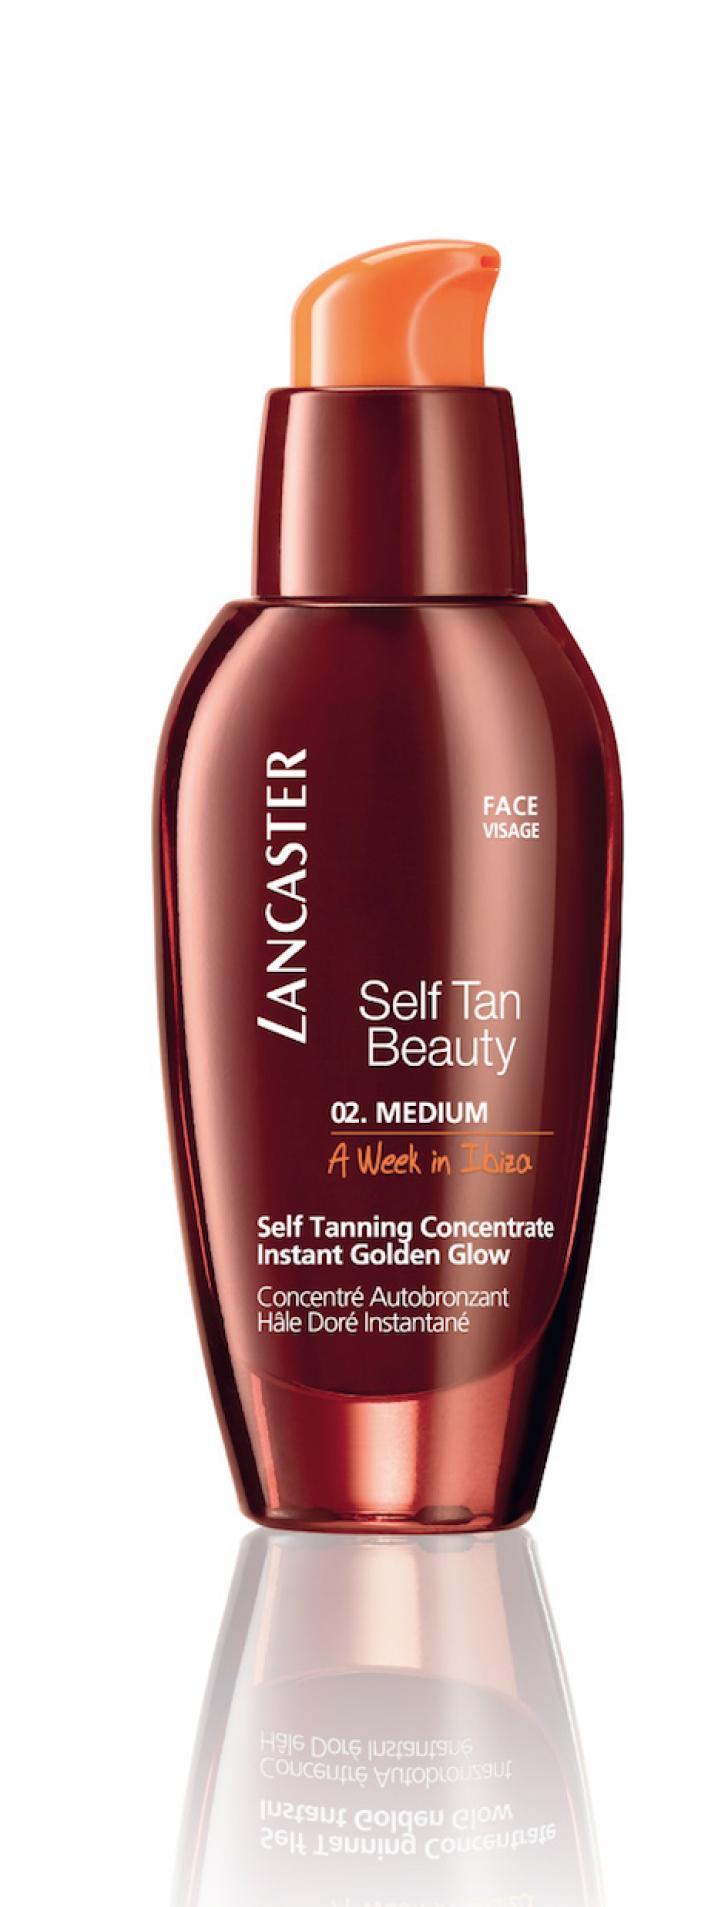 Self Tan Beauty Tanning Concentrate